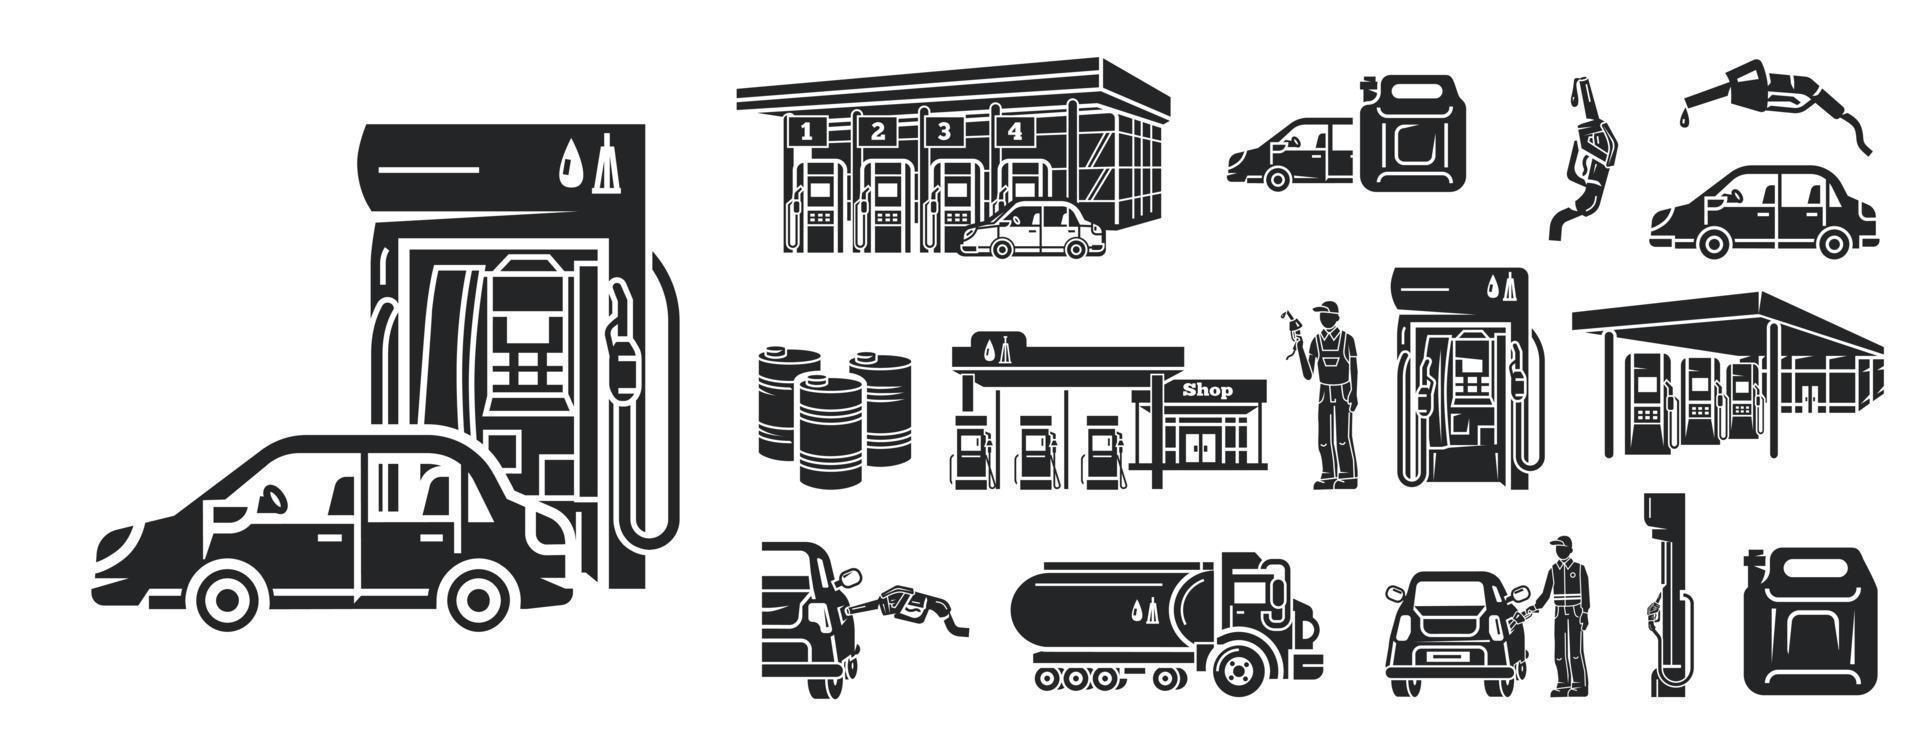 Petrol station icons set, simple style vector